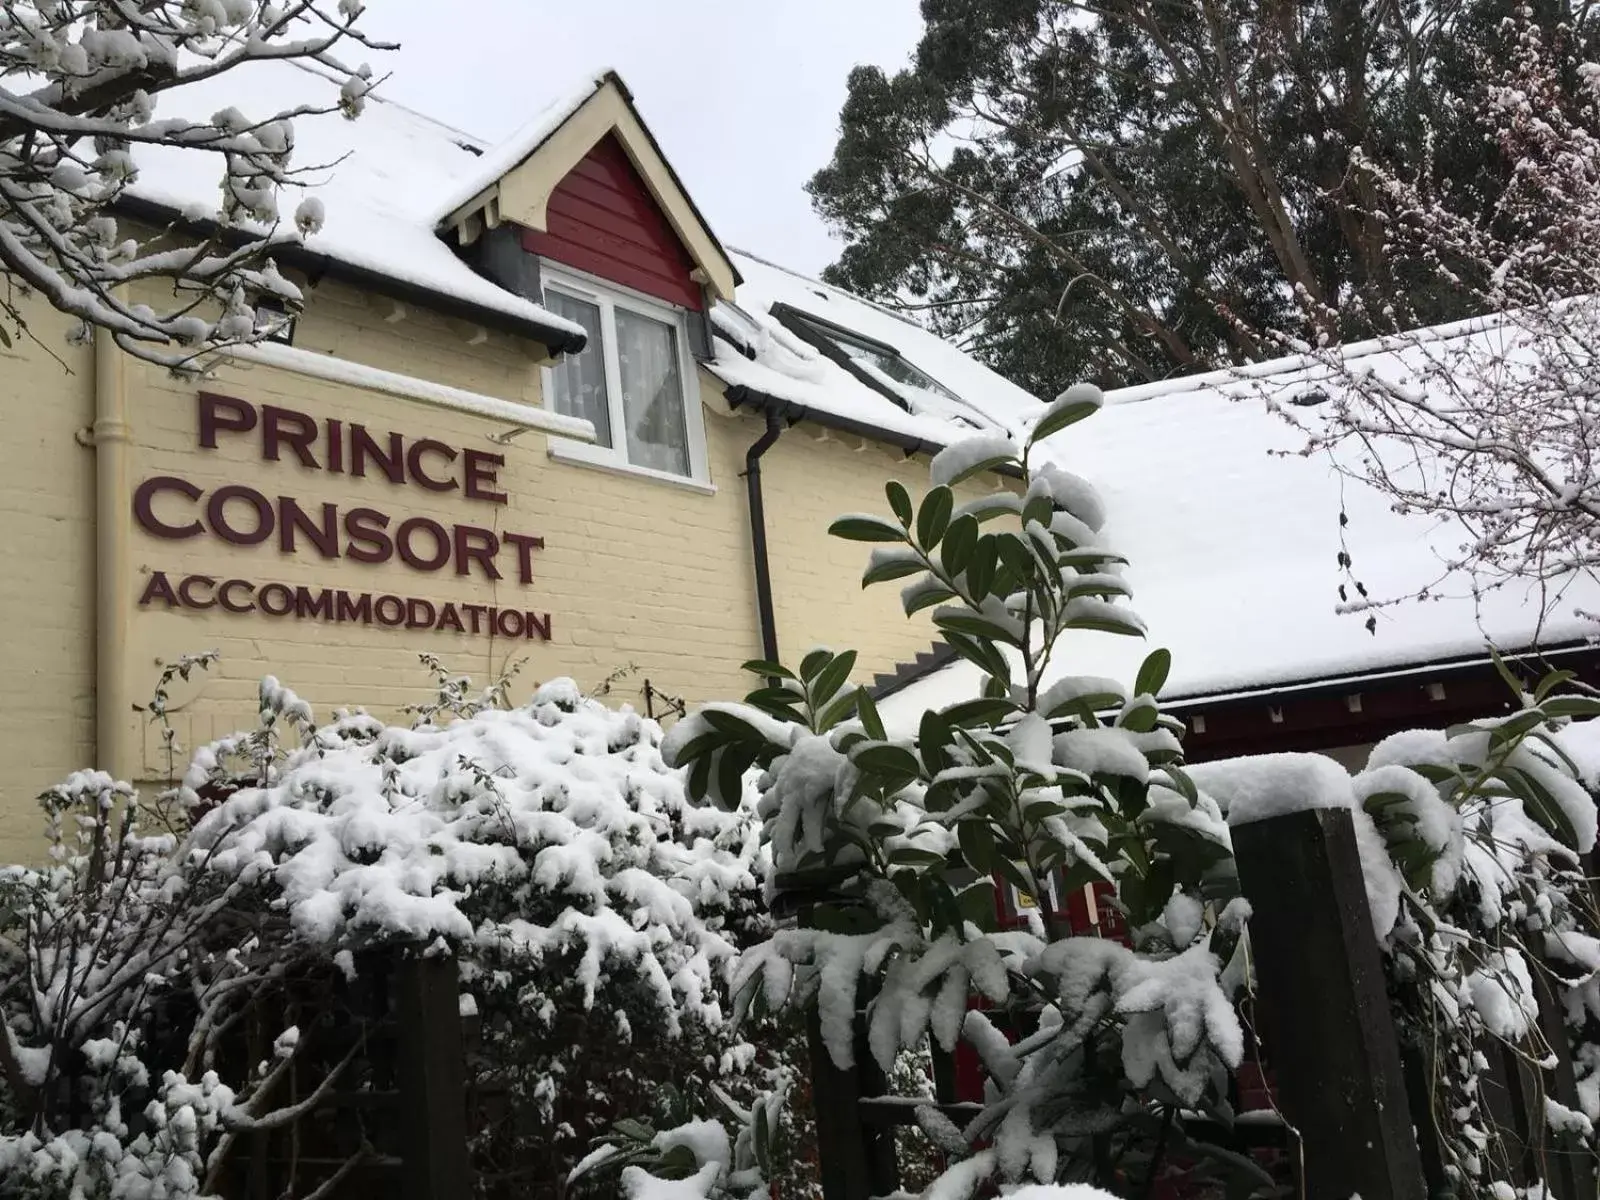 Property building, Winter in The Prince Consort